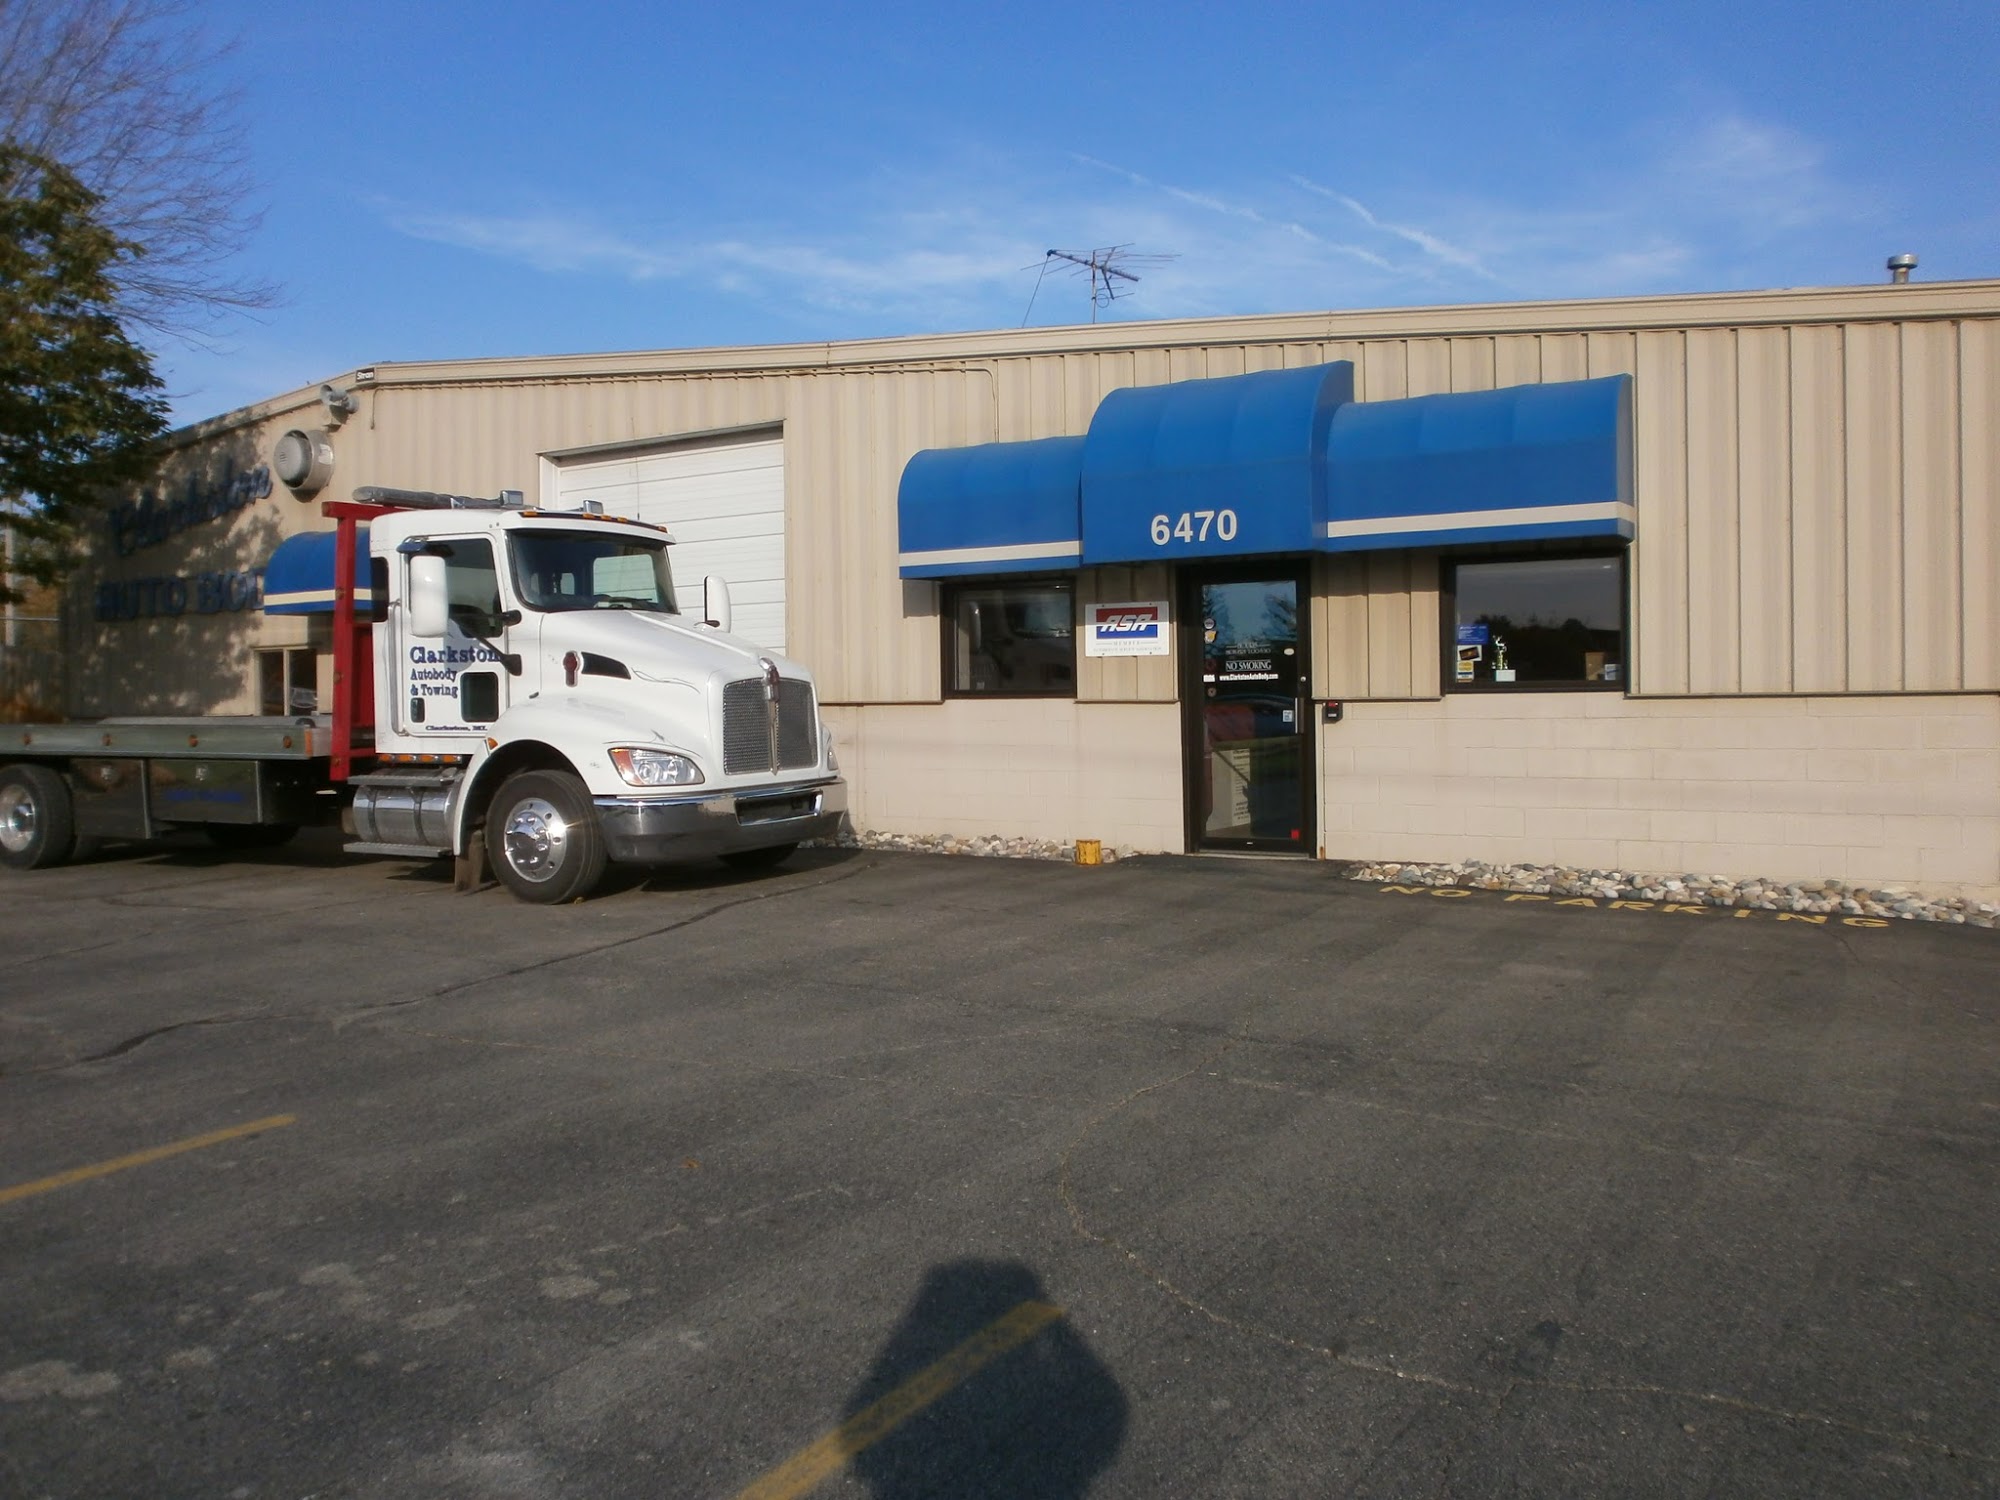 Clarkston Auto Body and Towing Inc